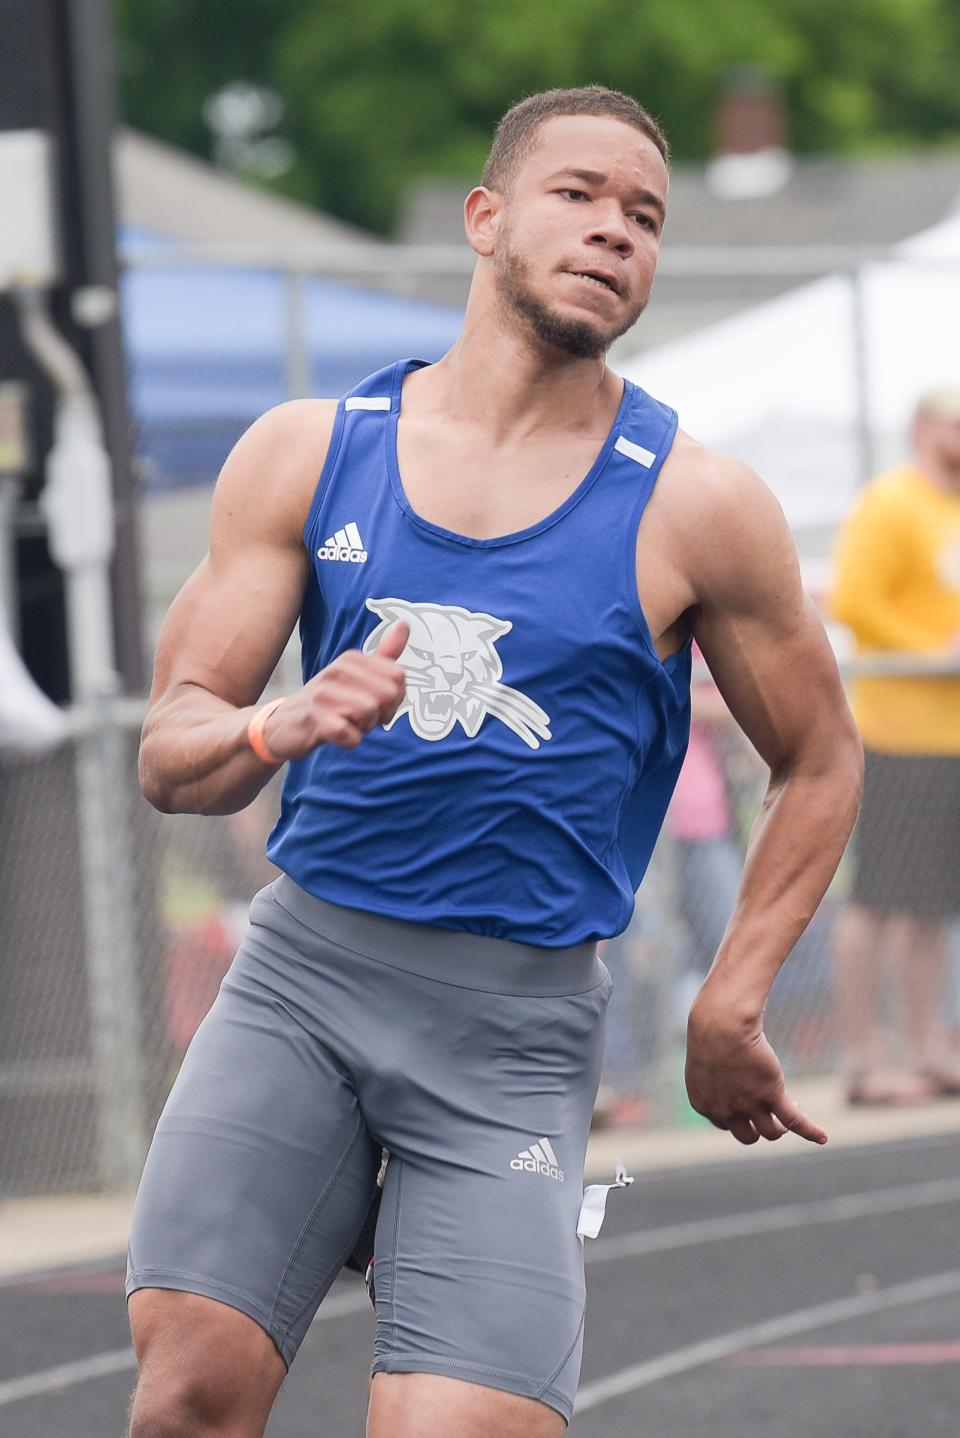 Cambridge’s Jonah Stanberry took fourth place in the boys 200 meter race with a time of 22.55 at the Division II regional track meet held at Chillicothe High School’s Obadiah Harris & Family Athletic Complex on Saturday, May 28, 2022, in Chillicothe, Ohio.